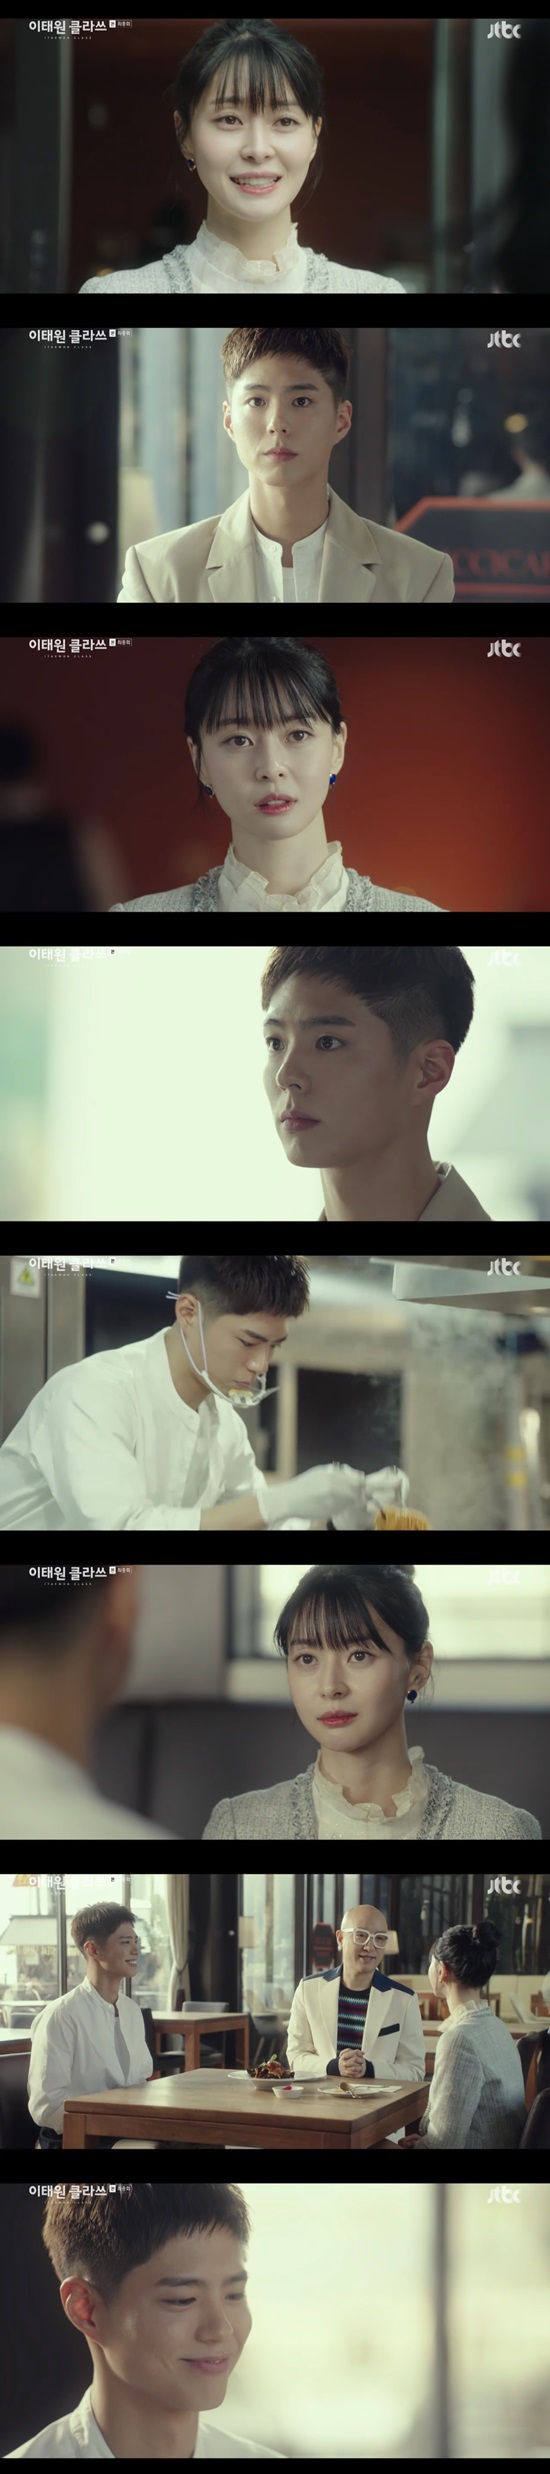 Actor Park Bo-gum made a special appearance in Itaewon Clath and made his presence.In the JTBC gilt drama Itaewon Clath broadcast on the 21st, Park appeared as a chef who came to a new store of Park Bo-black Oh Soo-ah (Kwon Nara).Oh soo-ah, who became a whistleblower in the Janga, witnessed the fall of Janga and went out to find his life.And Oh soo-ah has invested in Hong Seok-cheon and set up a new restaurant and once again became popular.Then, Oh soo-ah met him when he heard that a chef came to a meeting. And the main character was Park Bo-gum.Park, who appeared in a clean suit, said, Hello, and Oh soo-ah, who saw it, admired his viSuAls as Hit the jackpot!.Hong Seok-cheon also said, You have to pick it unconditionally. What kitchen looks like that. That face should be in the hall. He asked Oh soo-ah, Are you going to draw?Oh soo-ah, who said, I should cook well, tasted Park Bo-gums dishes in earnest. Next to him, Hong Seok-cheon said, Please say it is delicious.I have to pick it unconditionally. He also laughed at the urgent words.Park asked, Are you fit in the mouth? And Oh soo-ah said, Is it possible to go to work tomorrow?So, he said, Your boss, and showed his will and a bright smile.Park Bo-gum, who made a special appearance in Itaewon Clath with director Kim Sung-yoon who directed Gurmigreen Moonlight earlier.Before the broadcast, many netizens wondered how Park Bo-gum would appear in Itaewon Clath.And he boasted a clean black attire and a warm viSuAl that was unchanged, and he exuded his presence as a chef.The amount was not so much, but the appearance of Park Bo-gum was enough to impress many viewers as well as Kwon Nara and Hong Seok-cheon.On the other hand, Itaewon Clath ended at the end of the 16th on the 21st.Photo = JTBC Broadcasting Screen